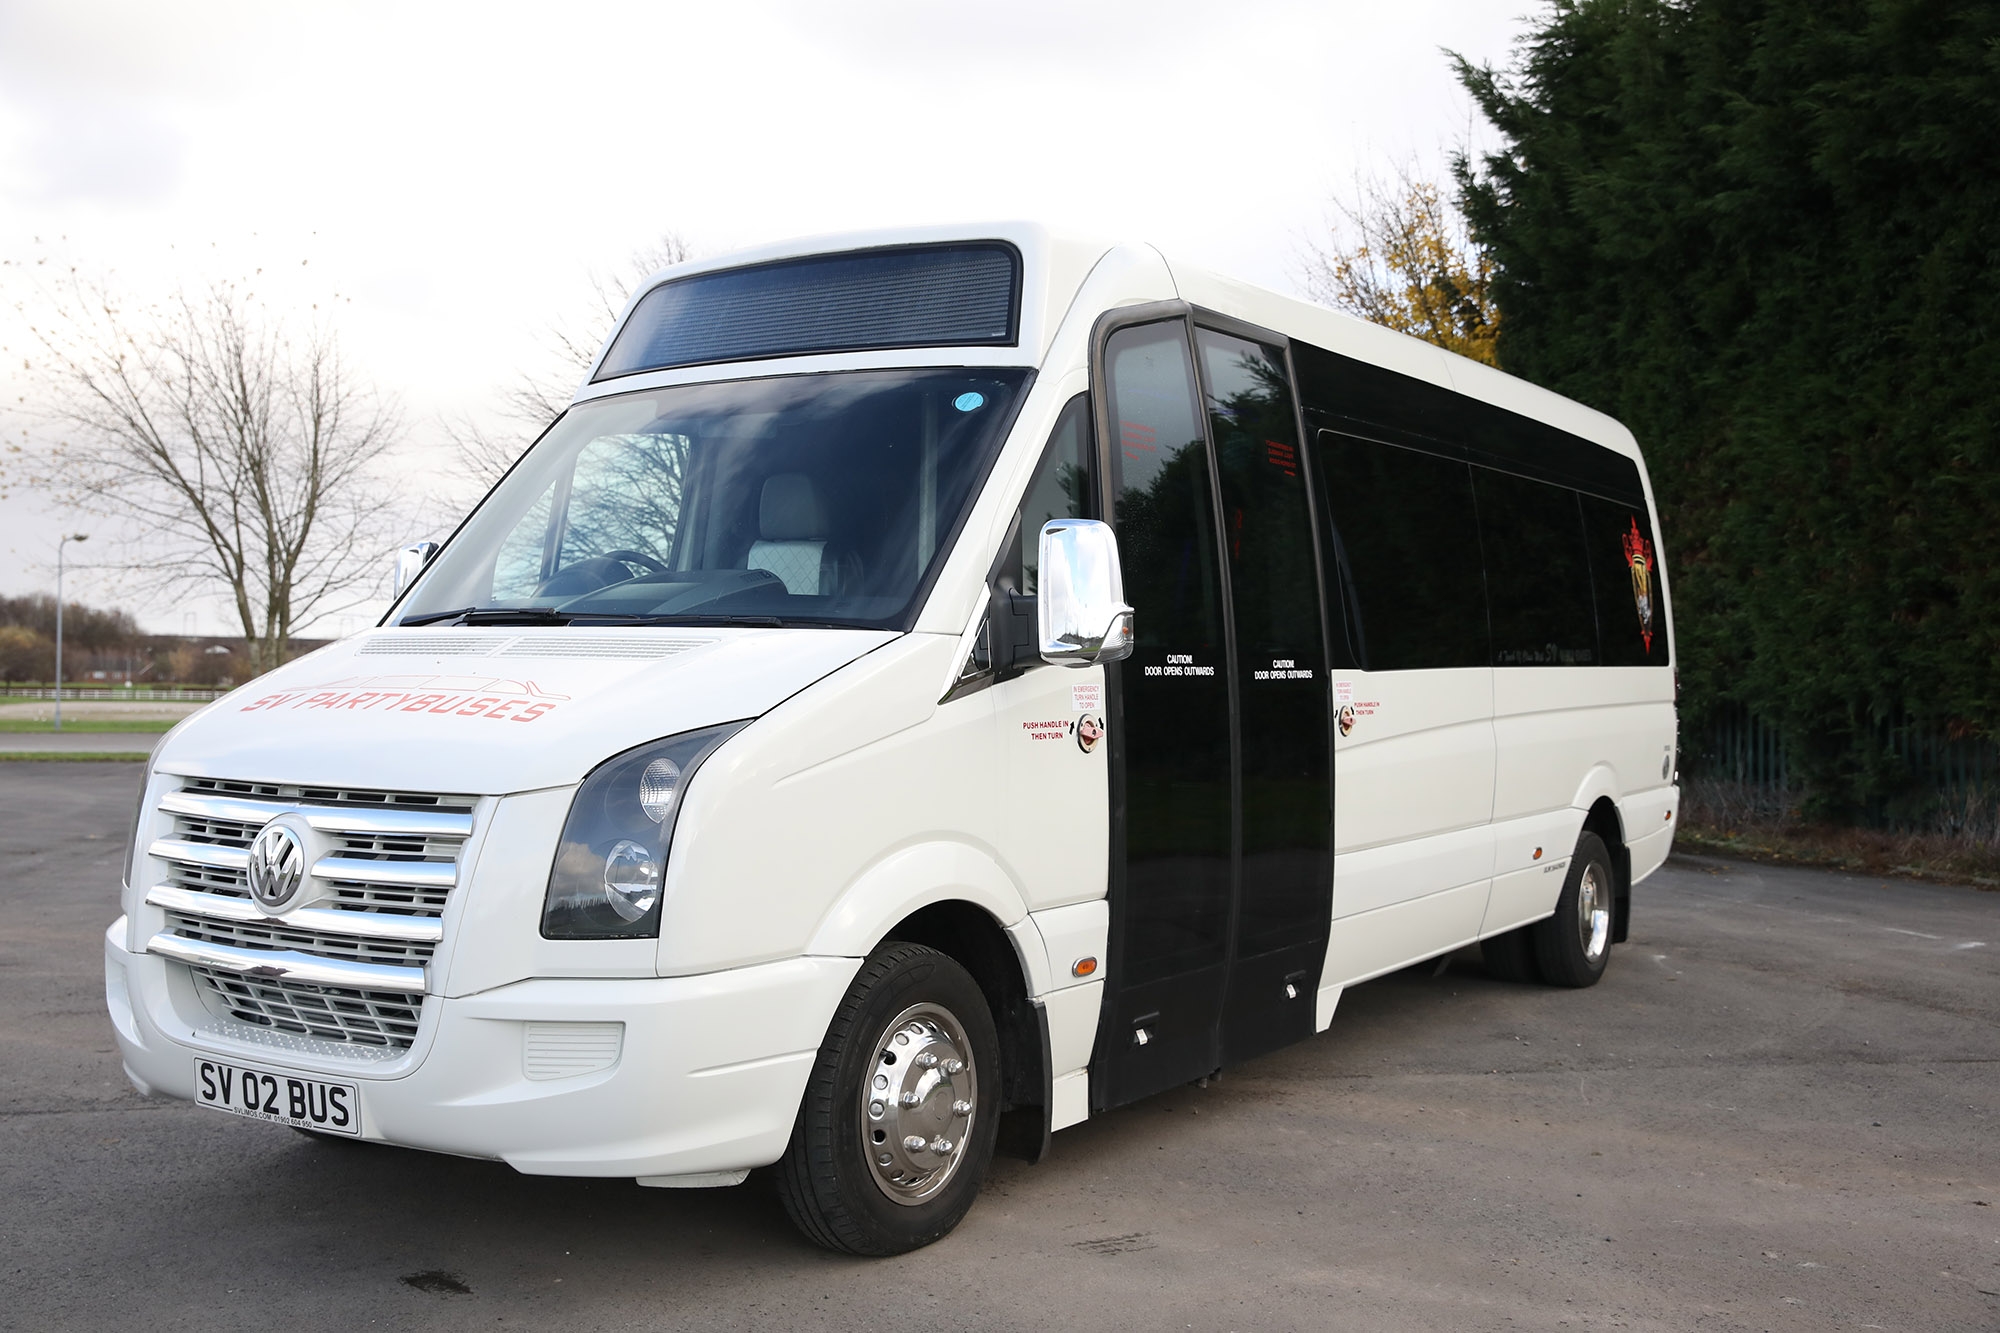 Party Bus Hire for Proms - The Ultimate Party Transport